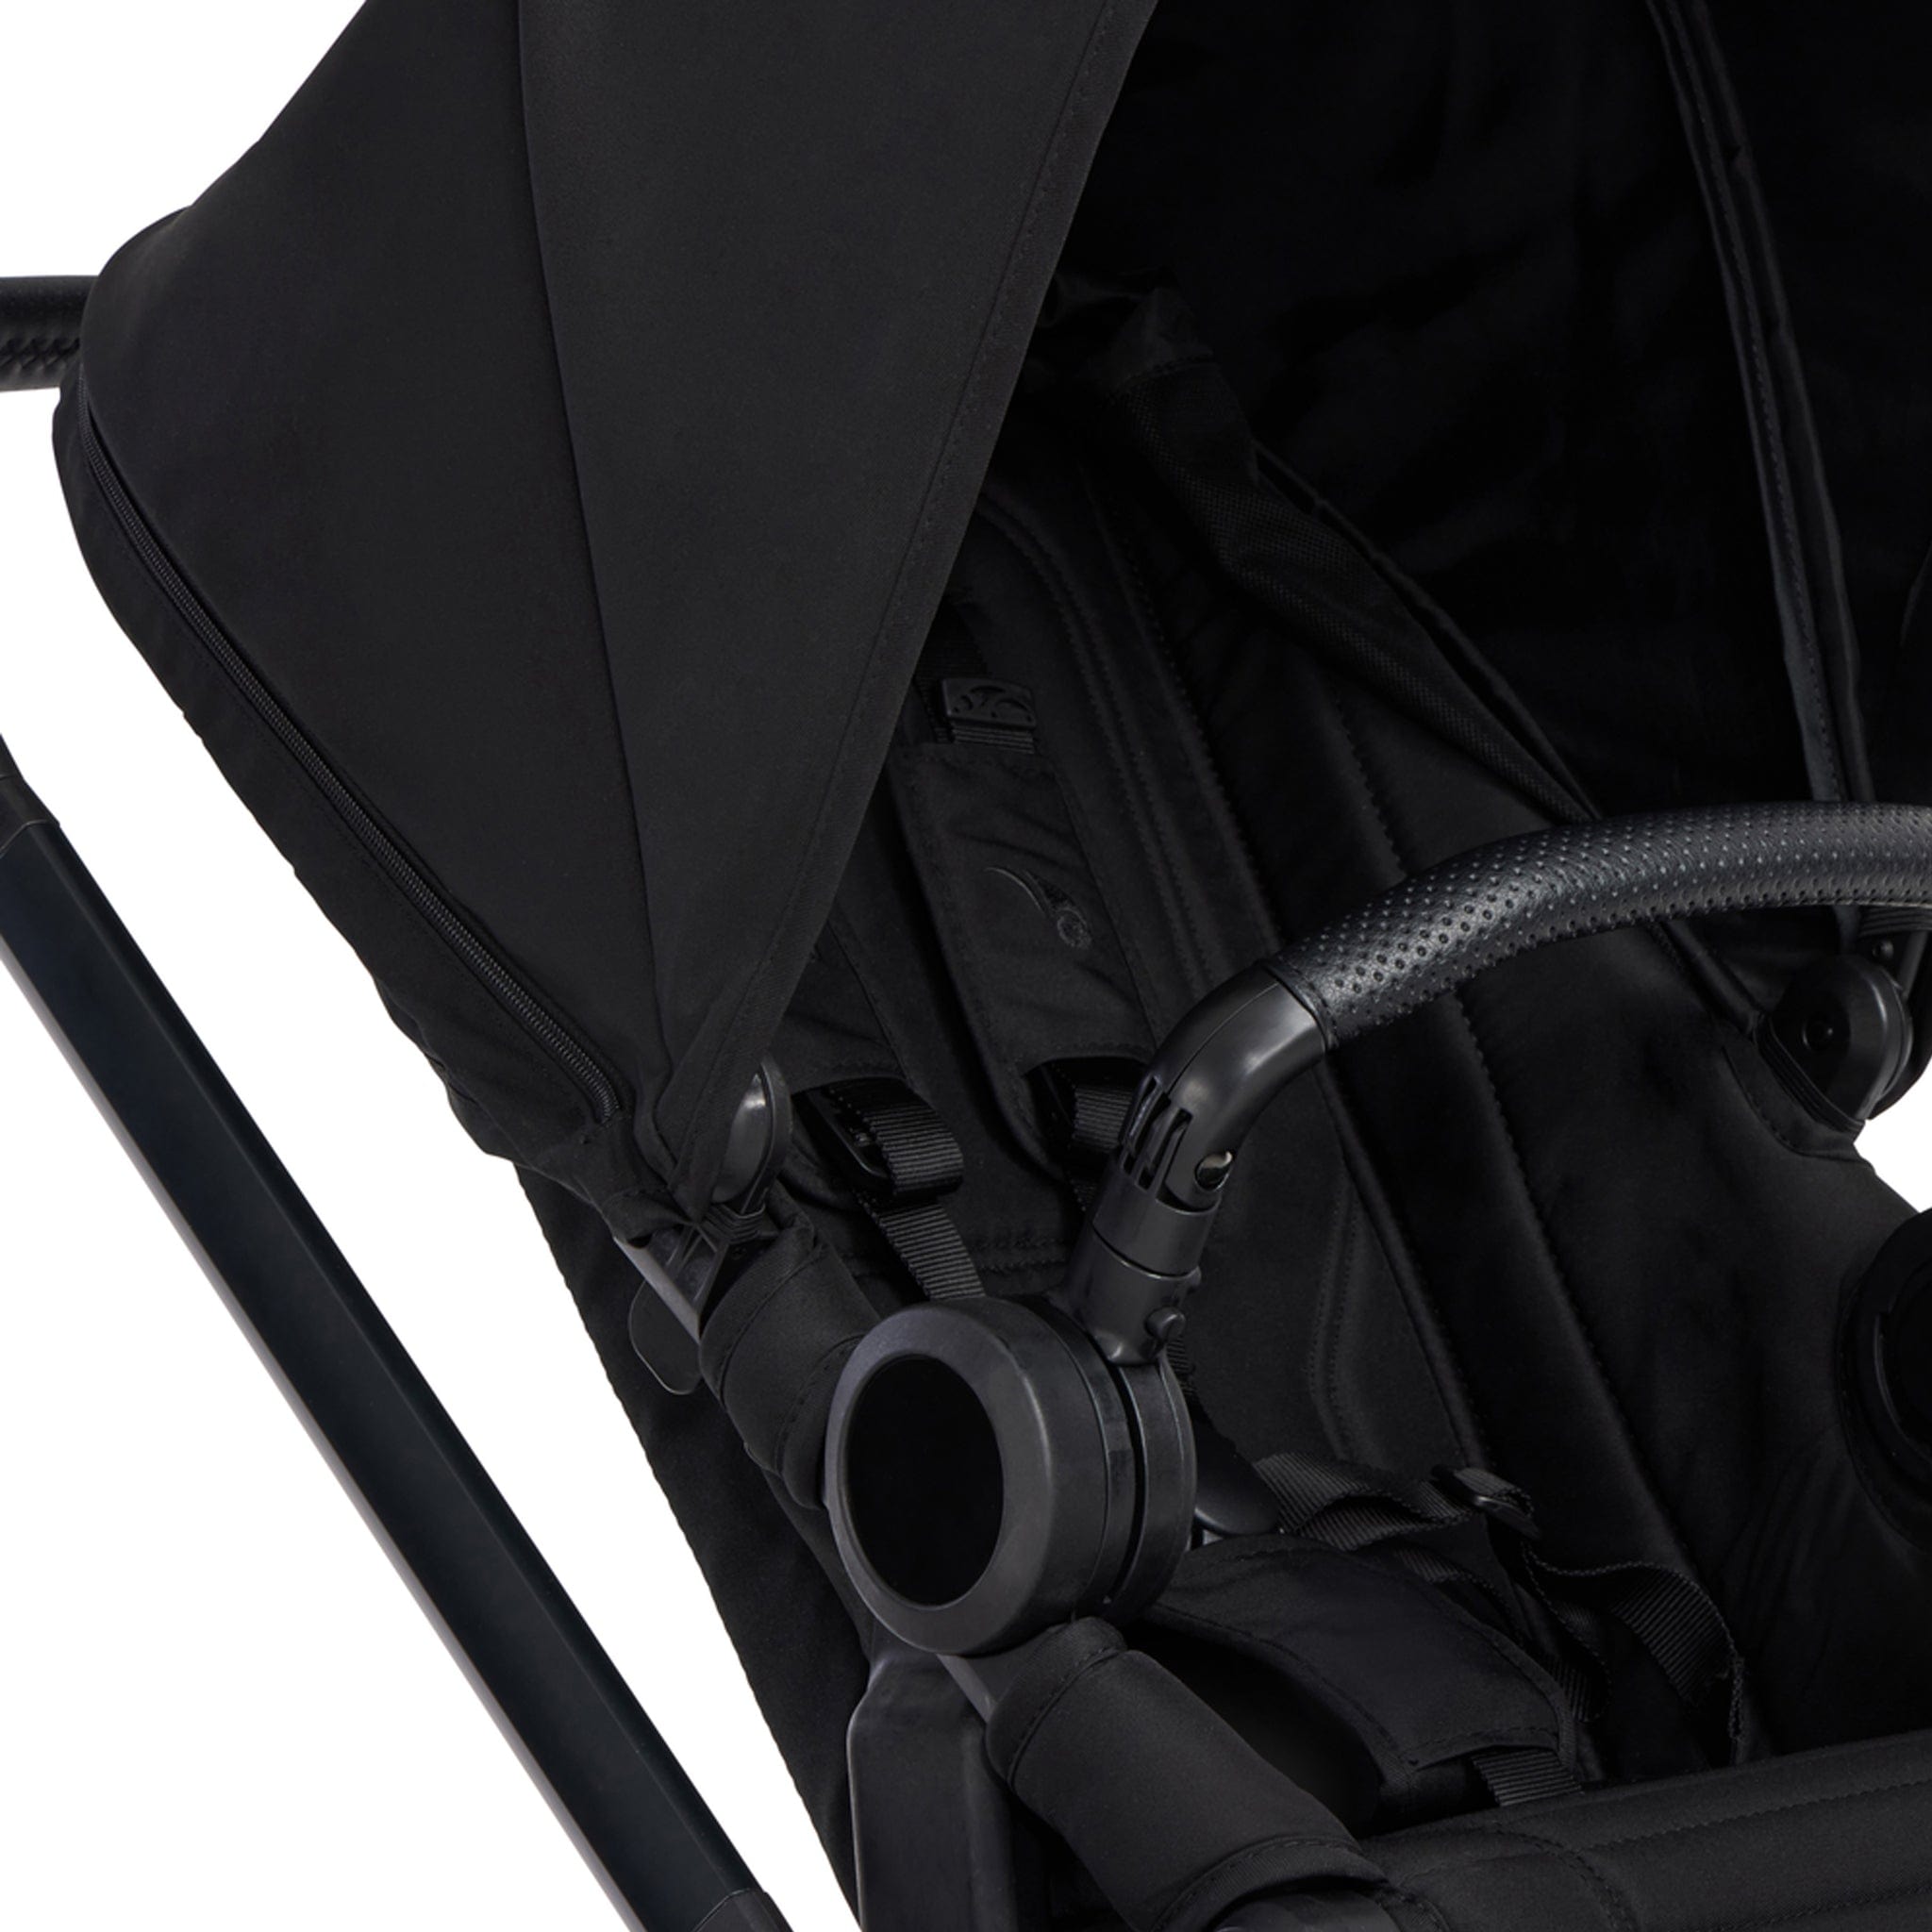 Baby Jogger City Sights Bundle in Rich Black Pushchairs & Buggies